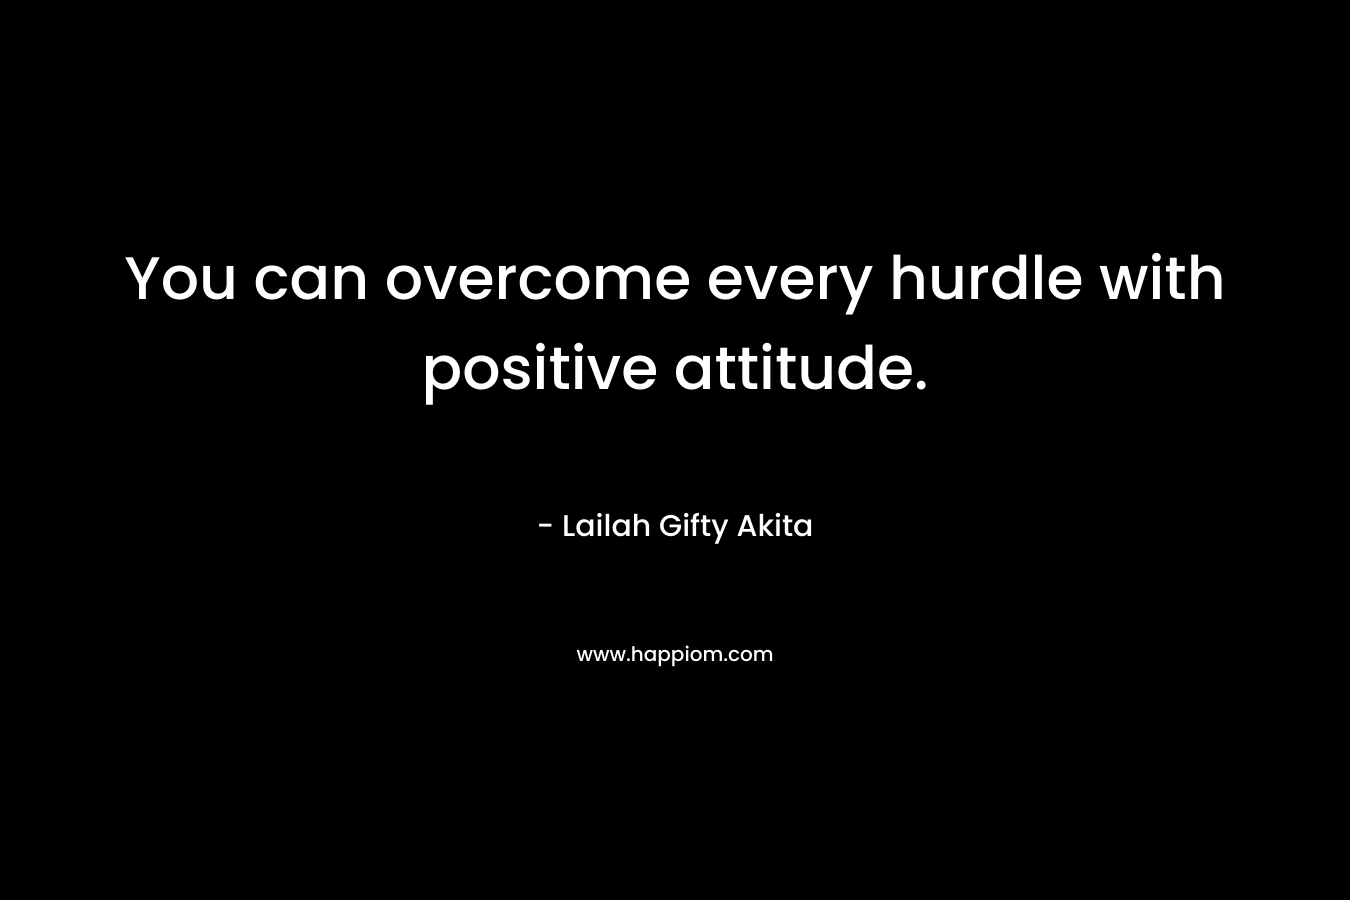 You can overcome every hurdle with positive attitude.